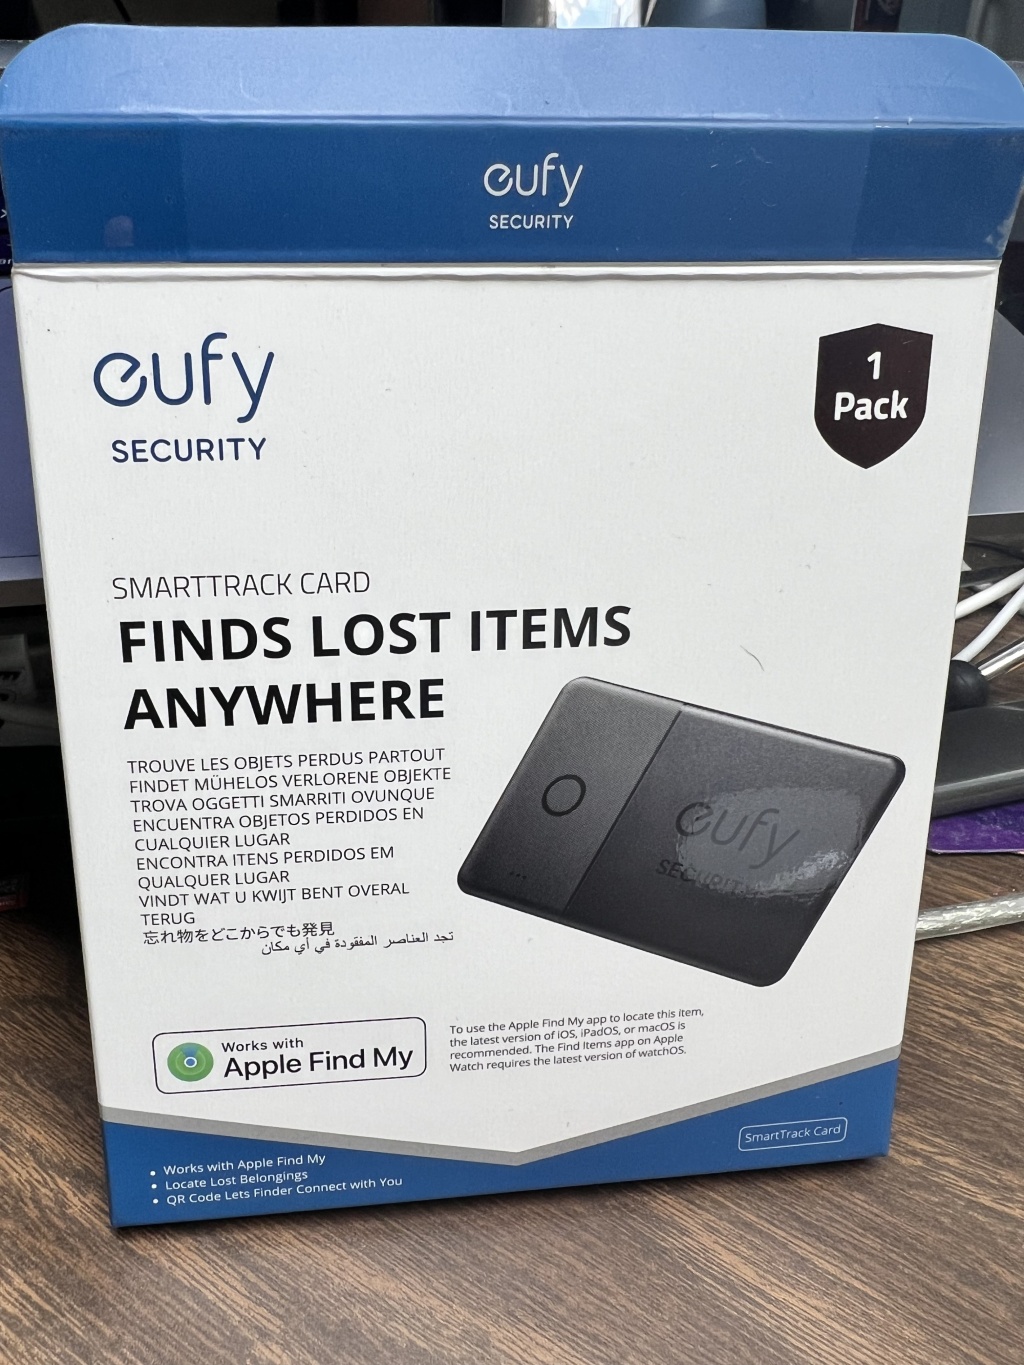 Introducing the Eufy Security Smarttrack Card: Your Personal Security Companion